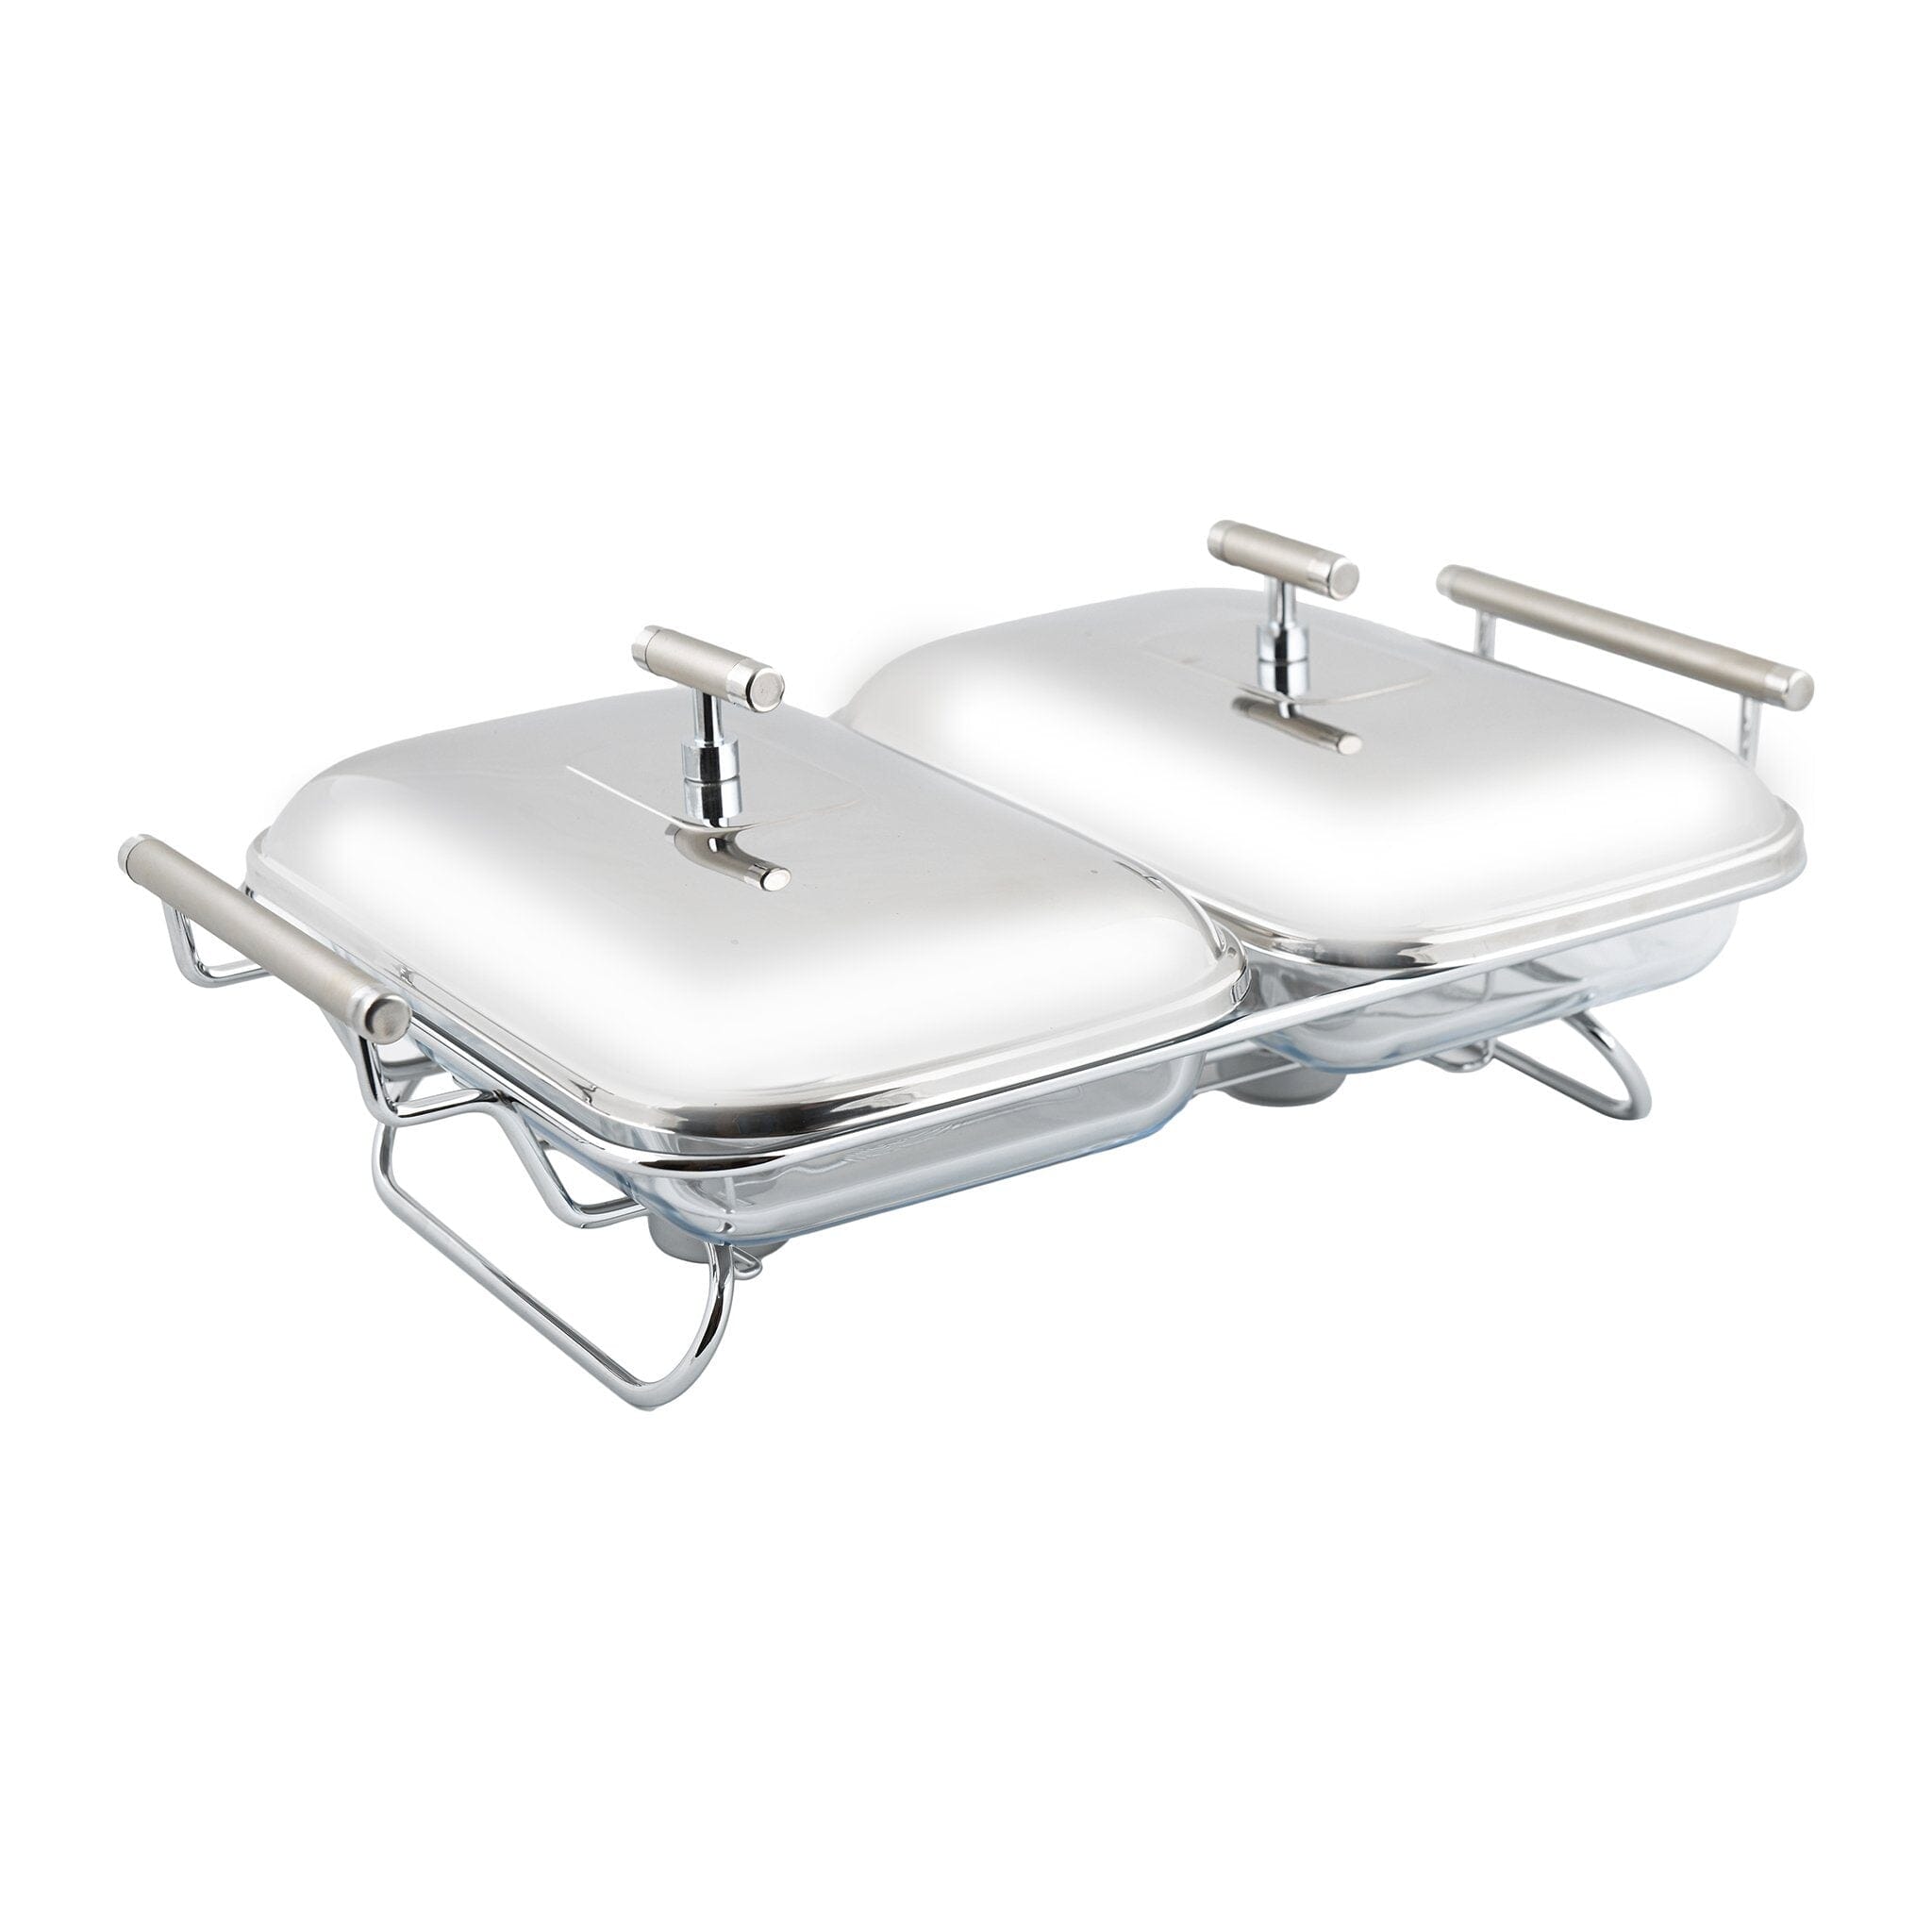 2 Rectangular Food Warmers with 2 Candles - Stainless Steel 18/10 & Tempered Glass - 2x1.5 Lit - 8000103